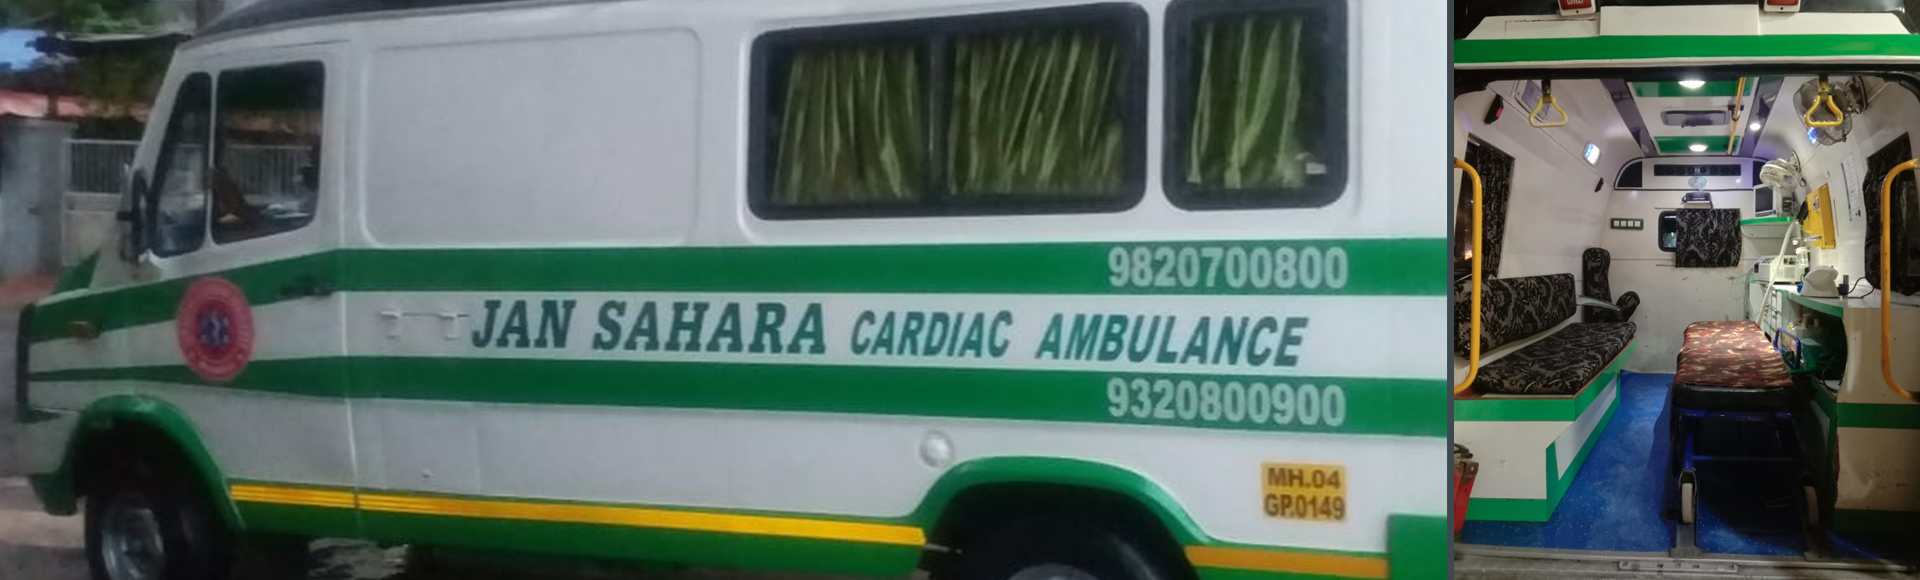 Ambulance Service In Mumbai - Fast, Reliable and Affordable